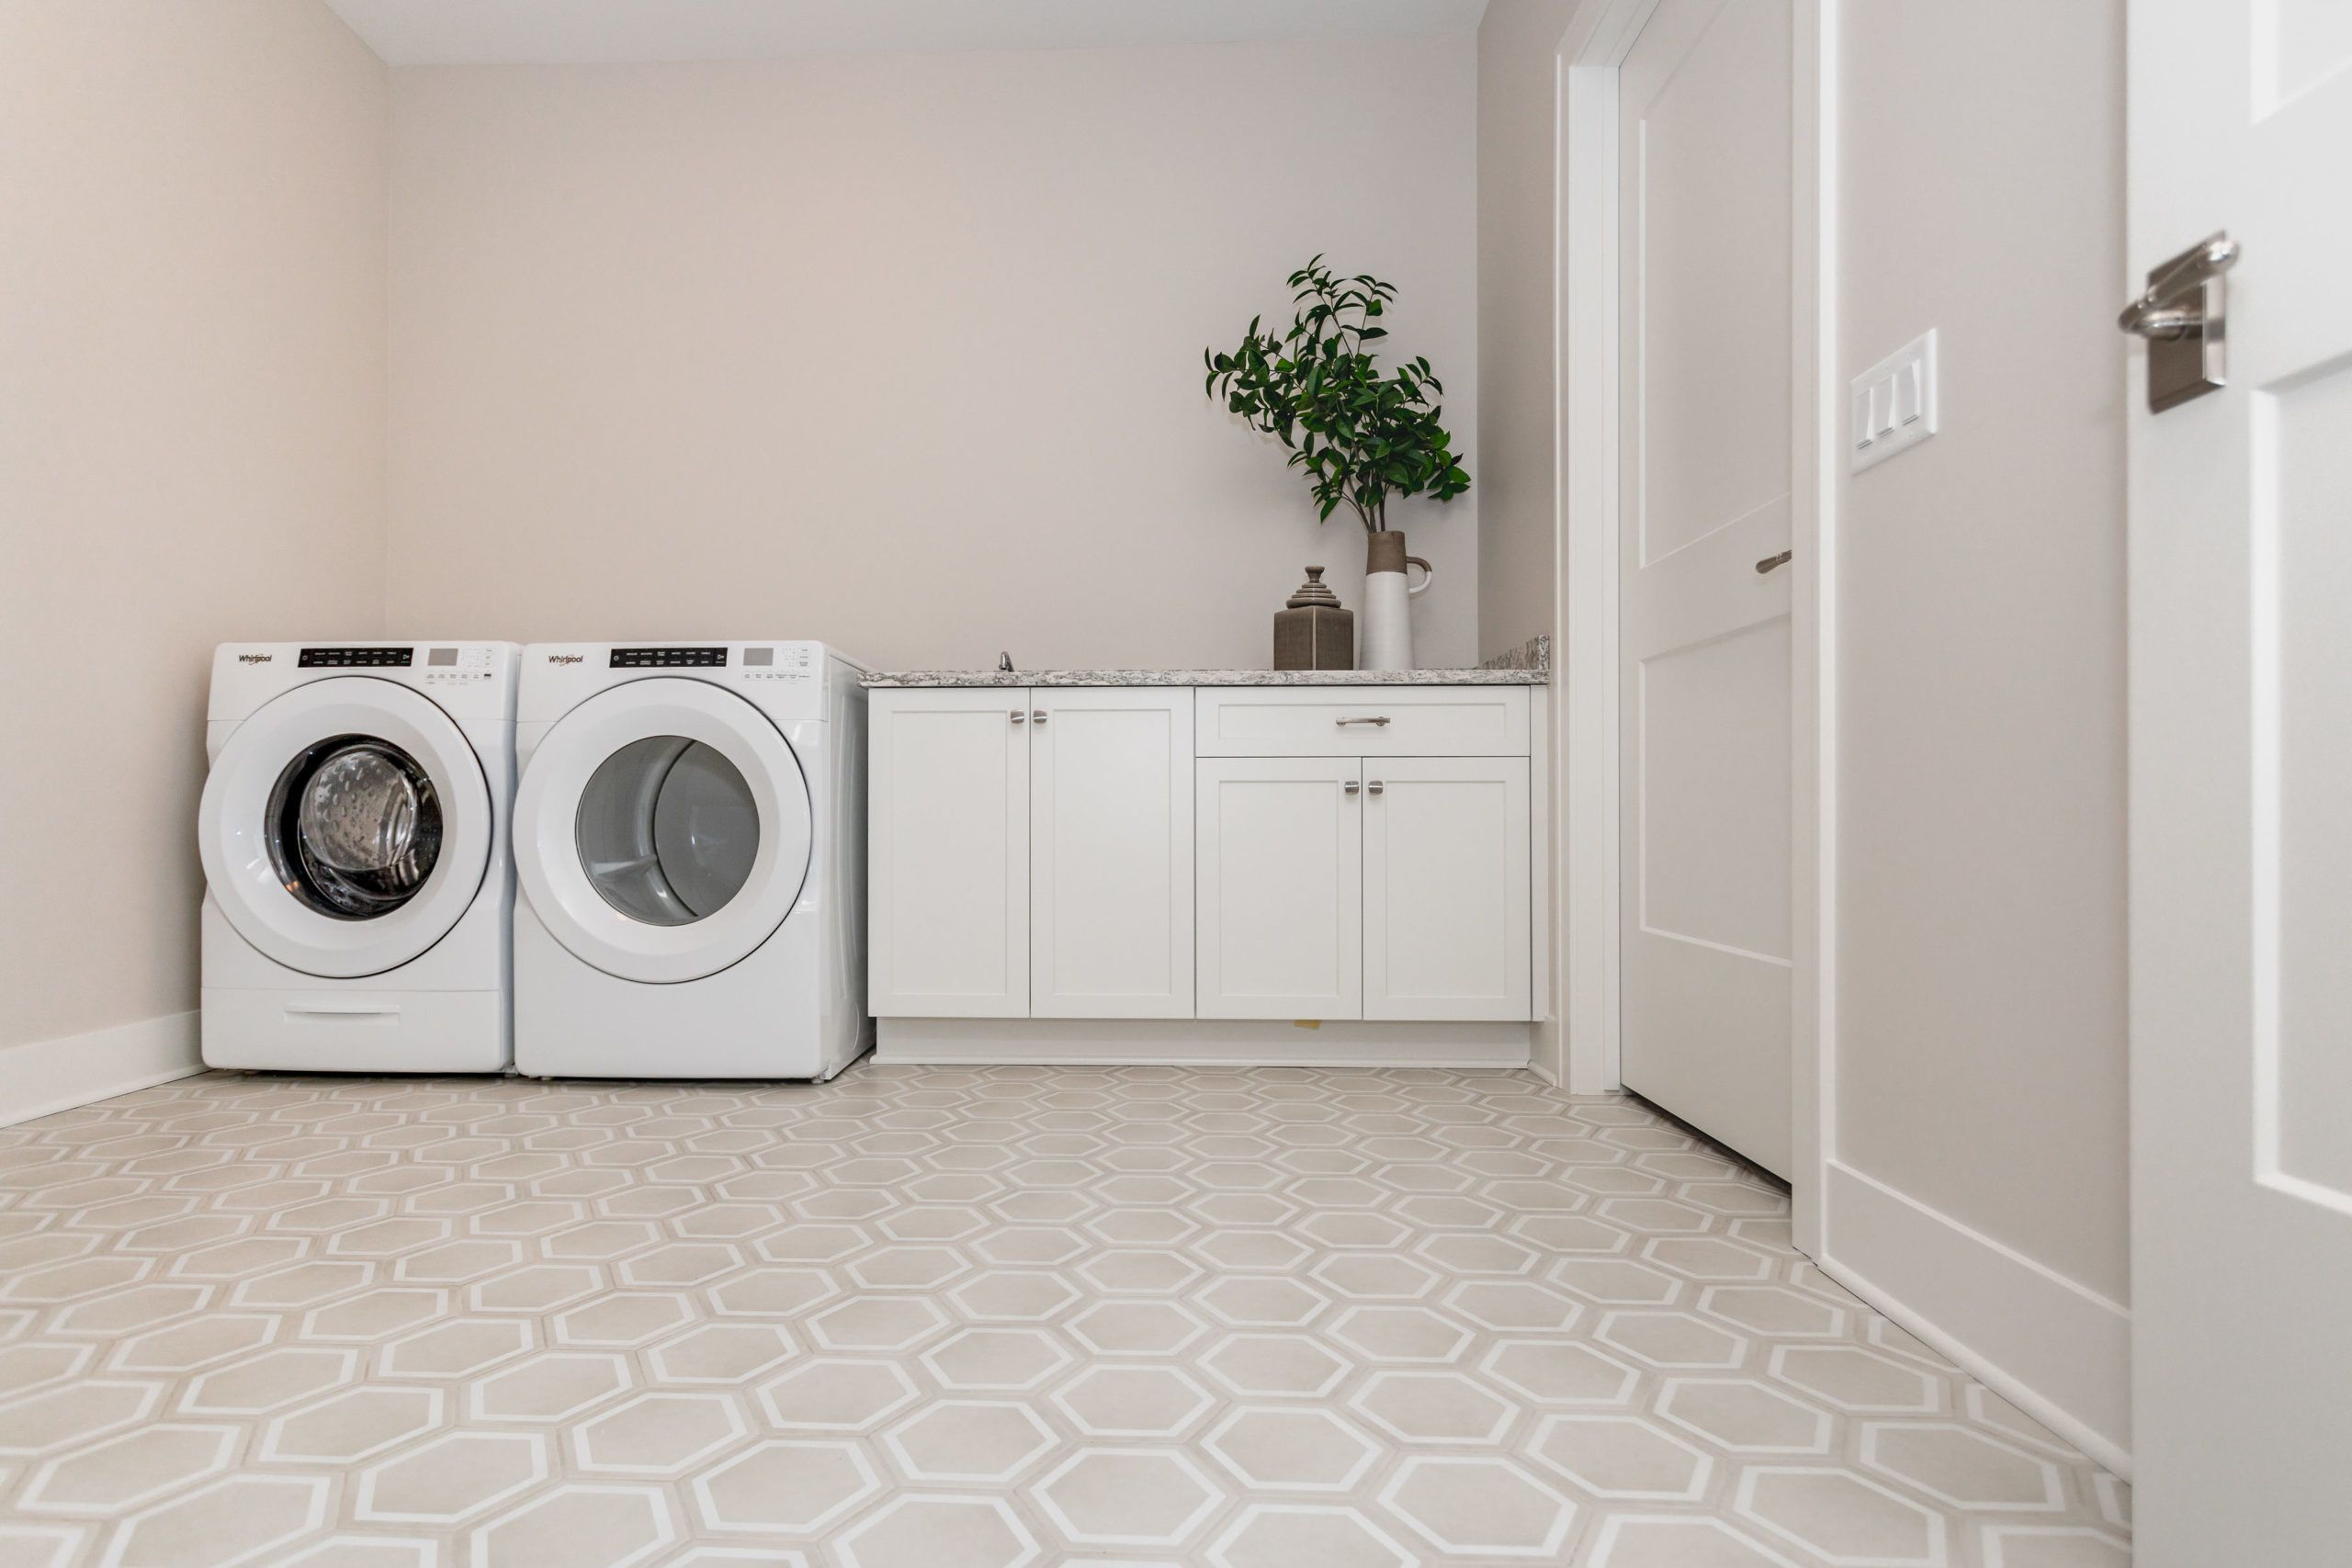 Laundry Room Cabinetry and Design